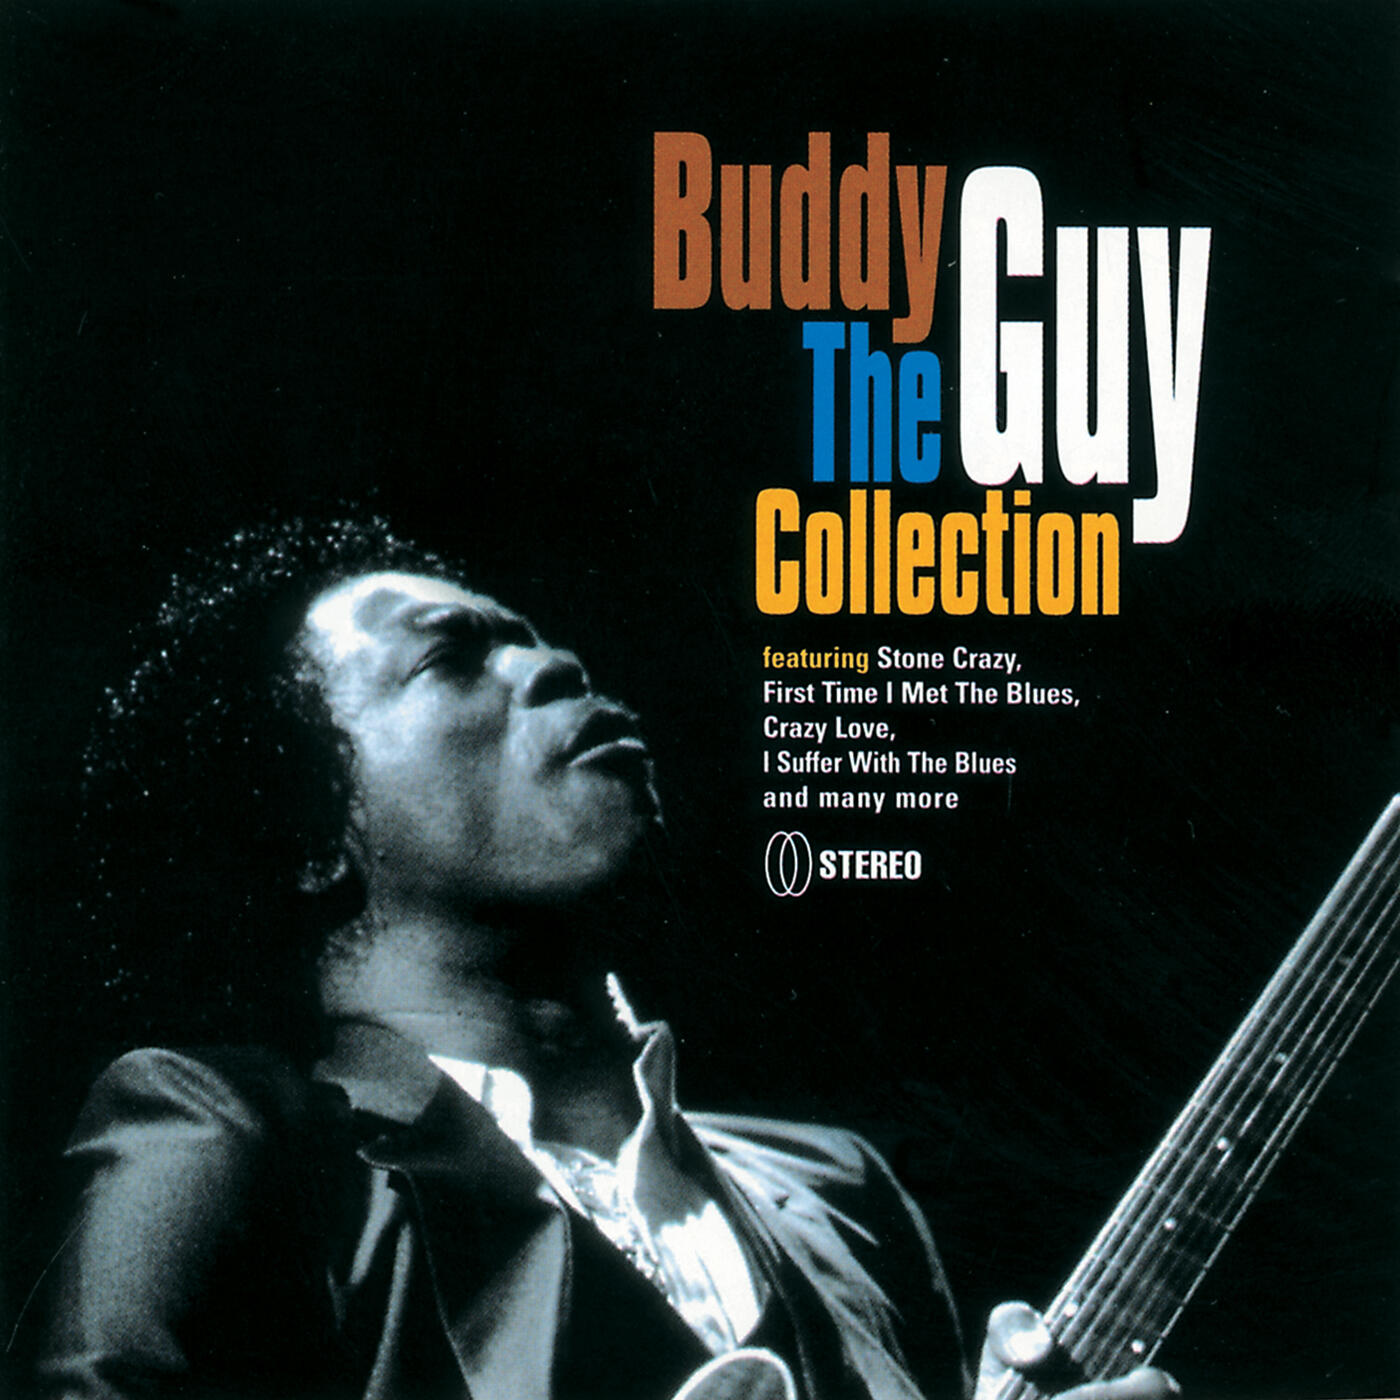 Buddy Guy The Collection iHeart